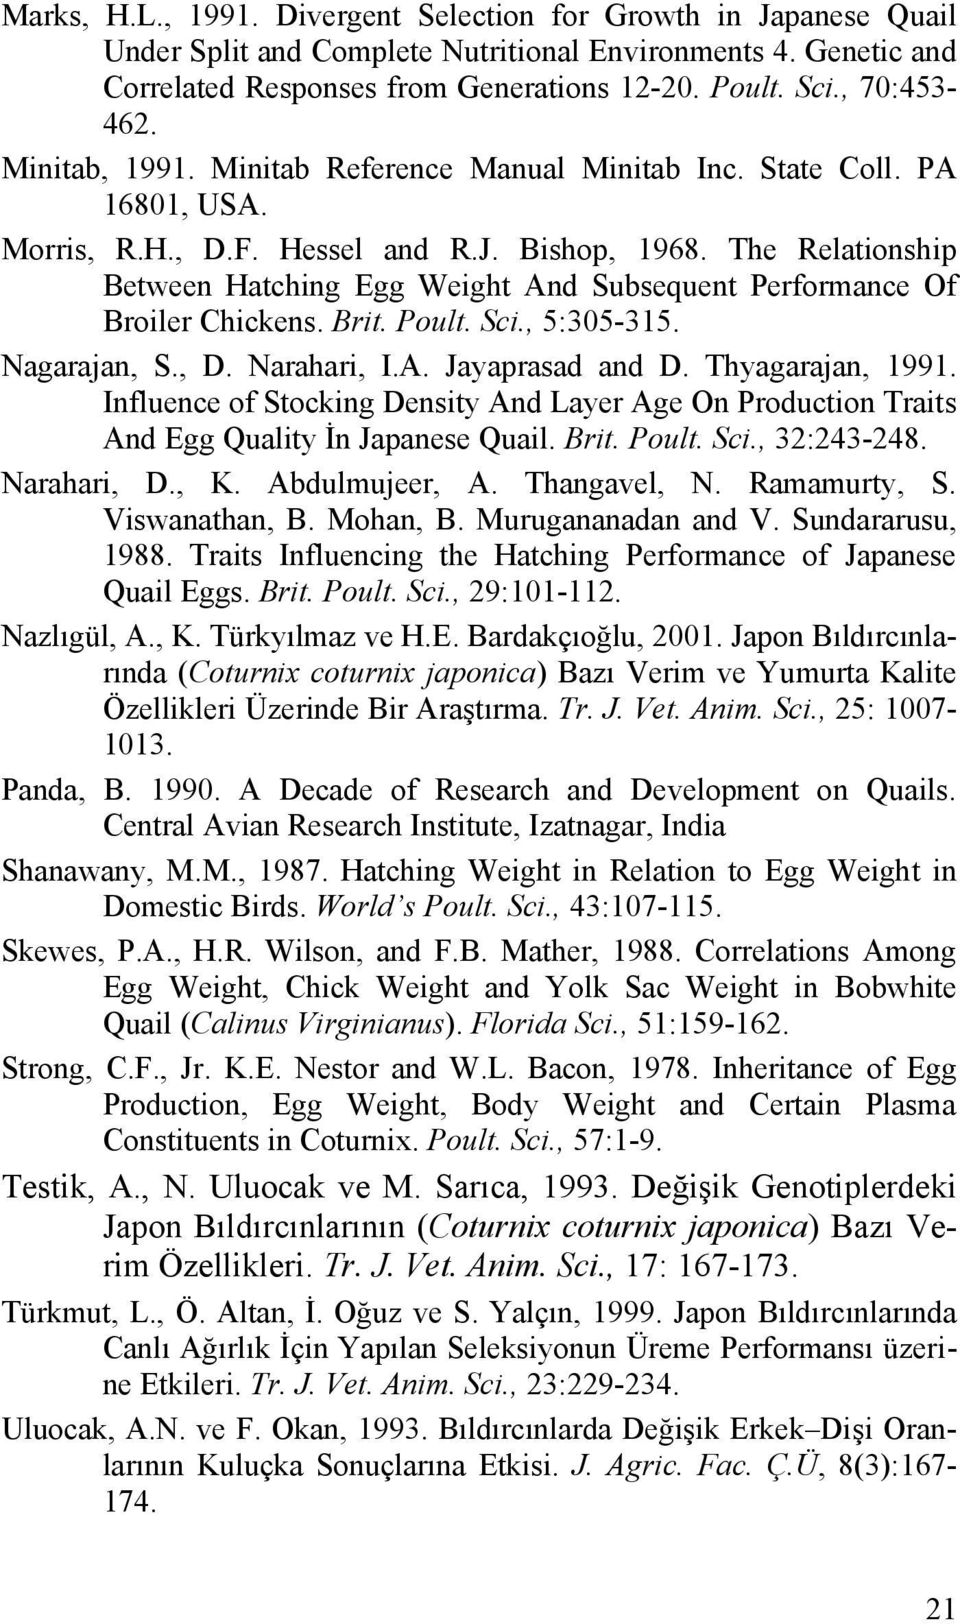 The Relationship Between Hatching Egg Weight And Subsequent Performance Of Broiler Chickens. Brit. Poult. Sci., 5:305-315. Nagarajan, S., D. Narahari, I.A. Jayaprasad and D. Thyagarajan, 1991.